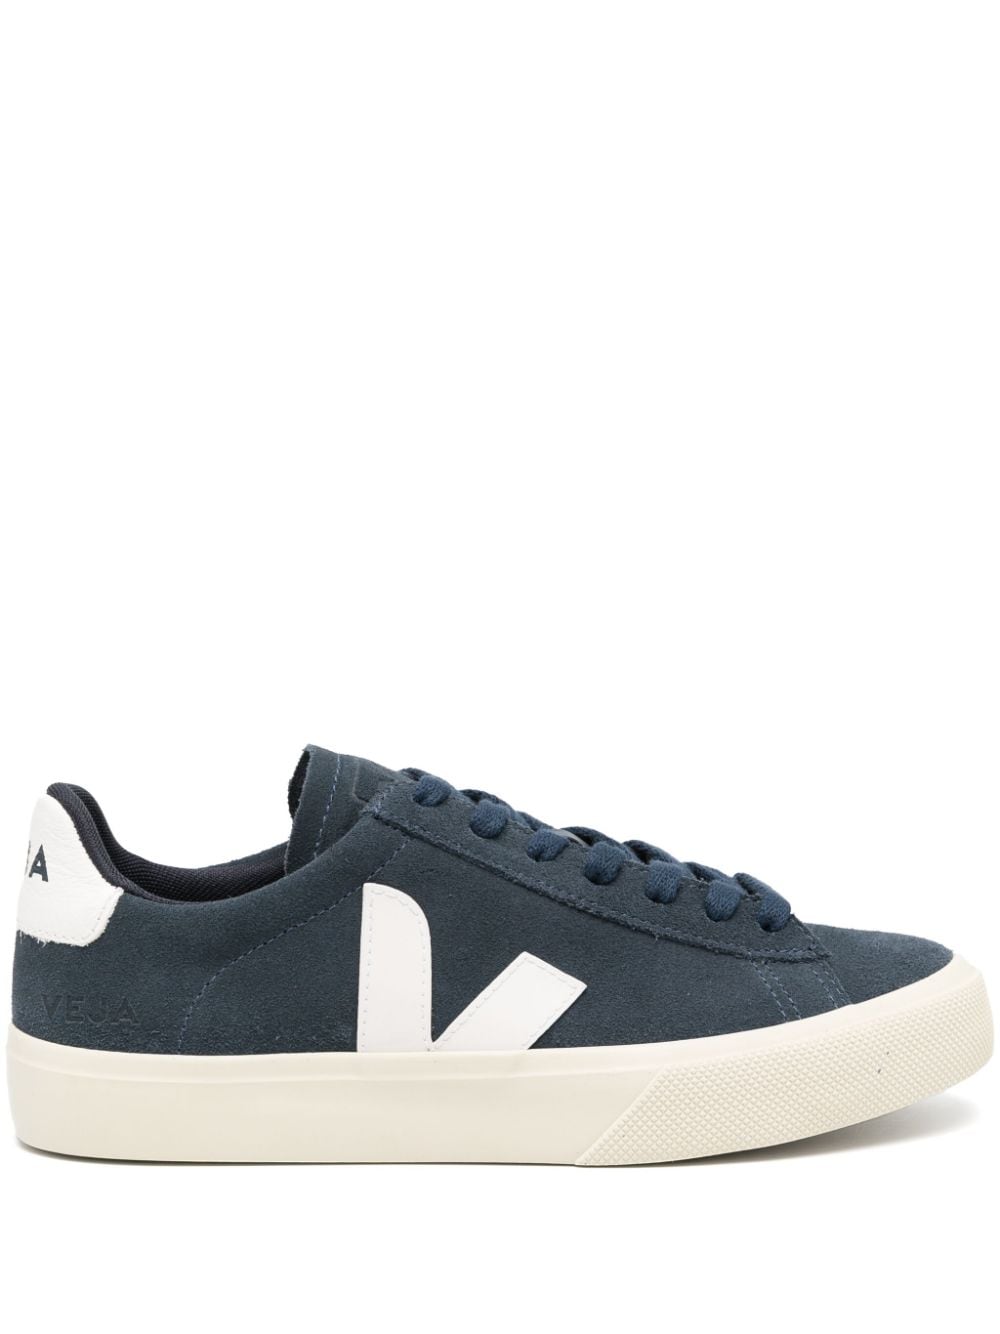 Veja Campo Suede Sneakers In Blue